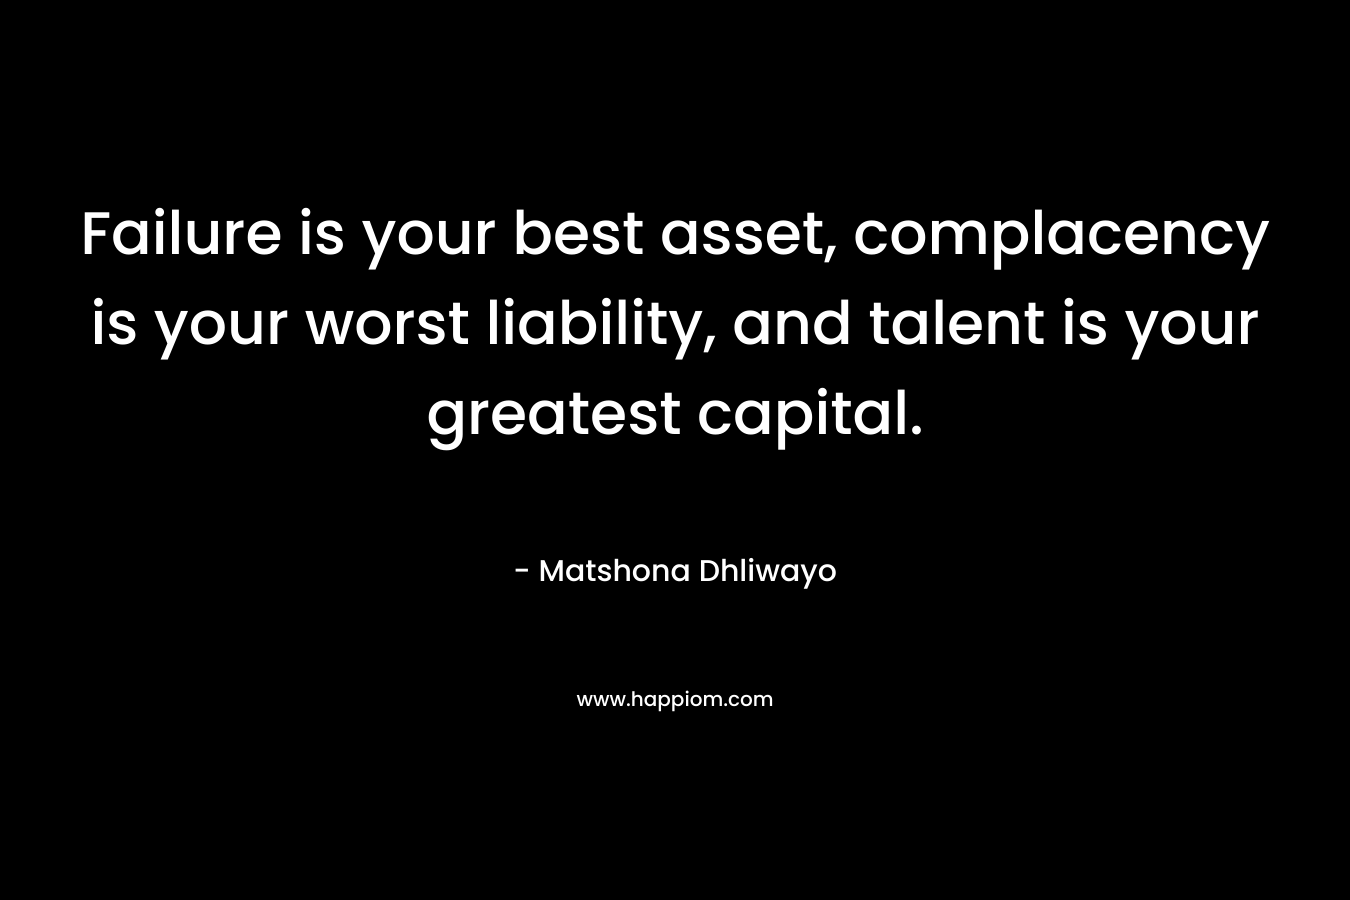 Failure is your best asset, complacency is your worst liability, and talent is your greatest capital.